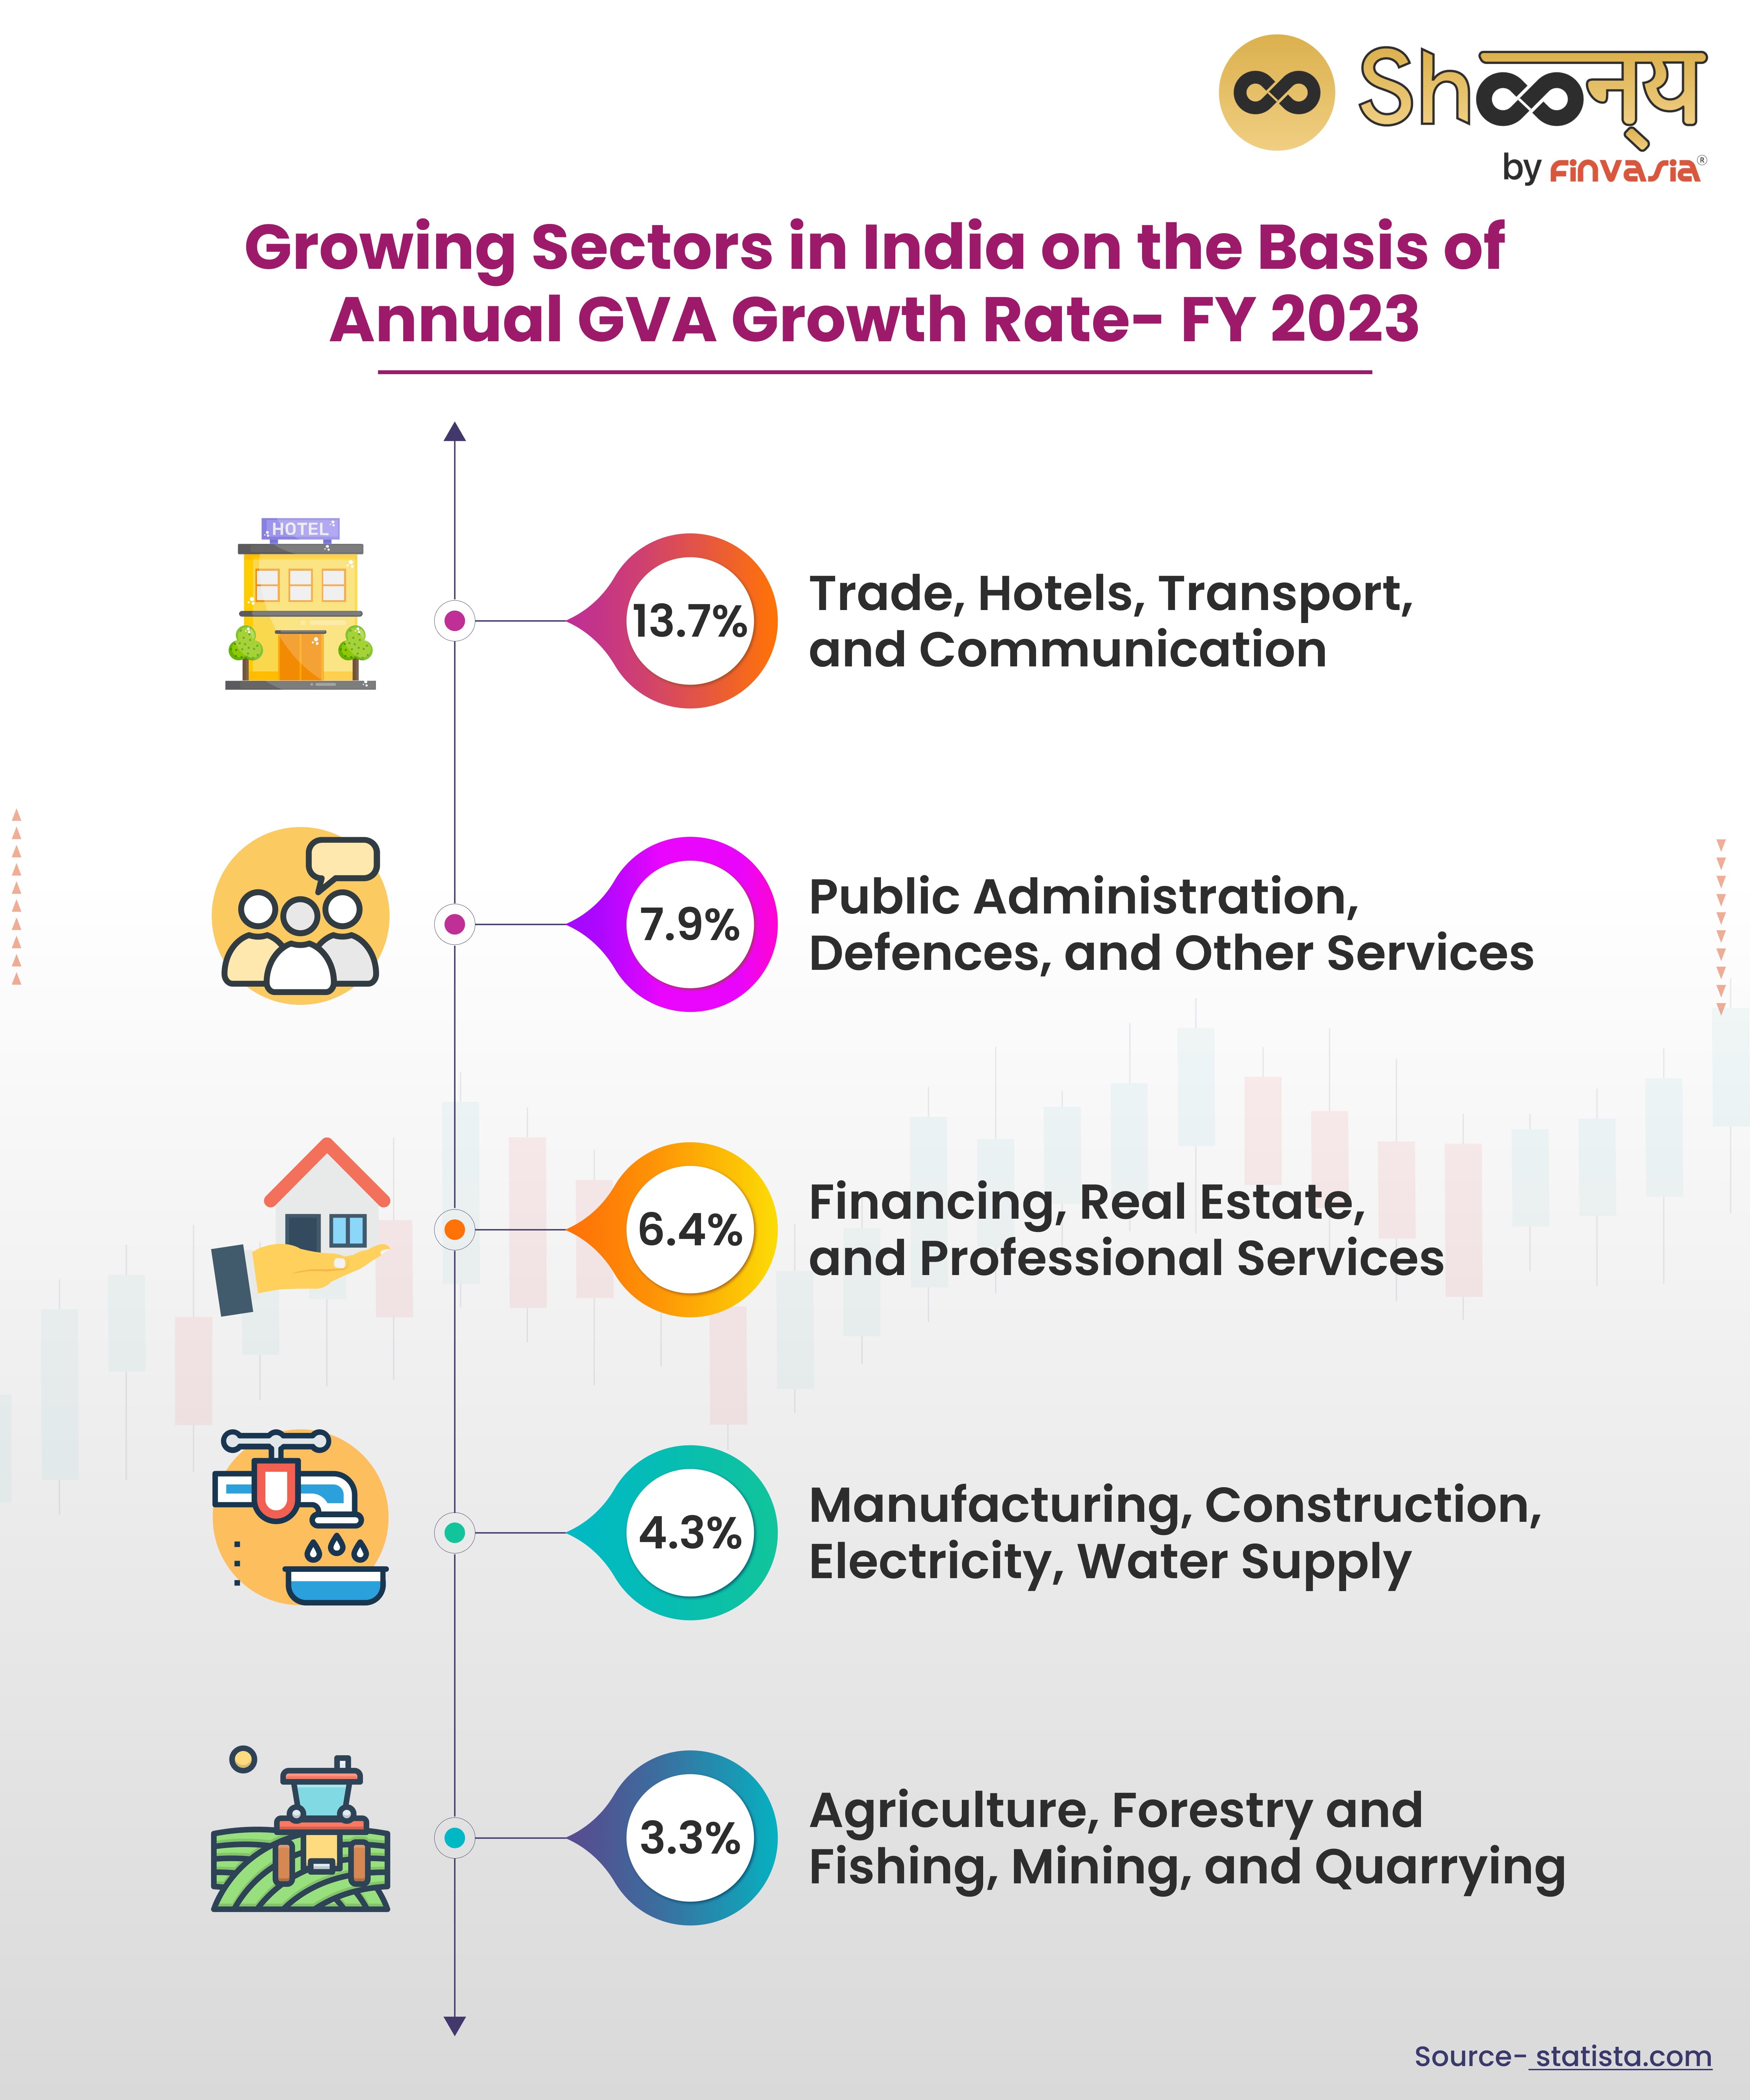 Growing Sectors in India